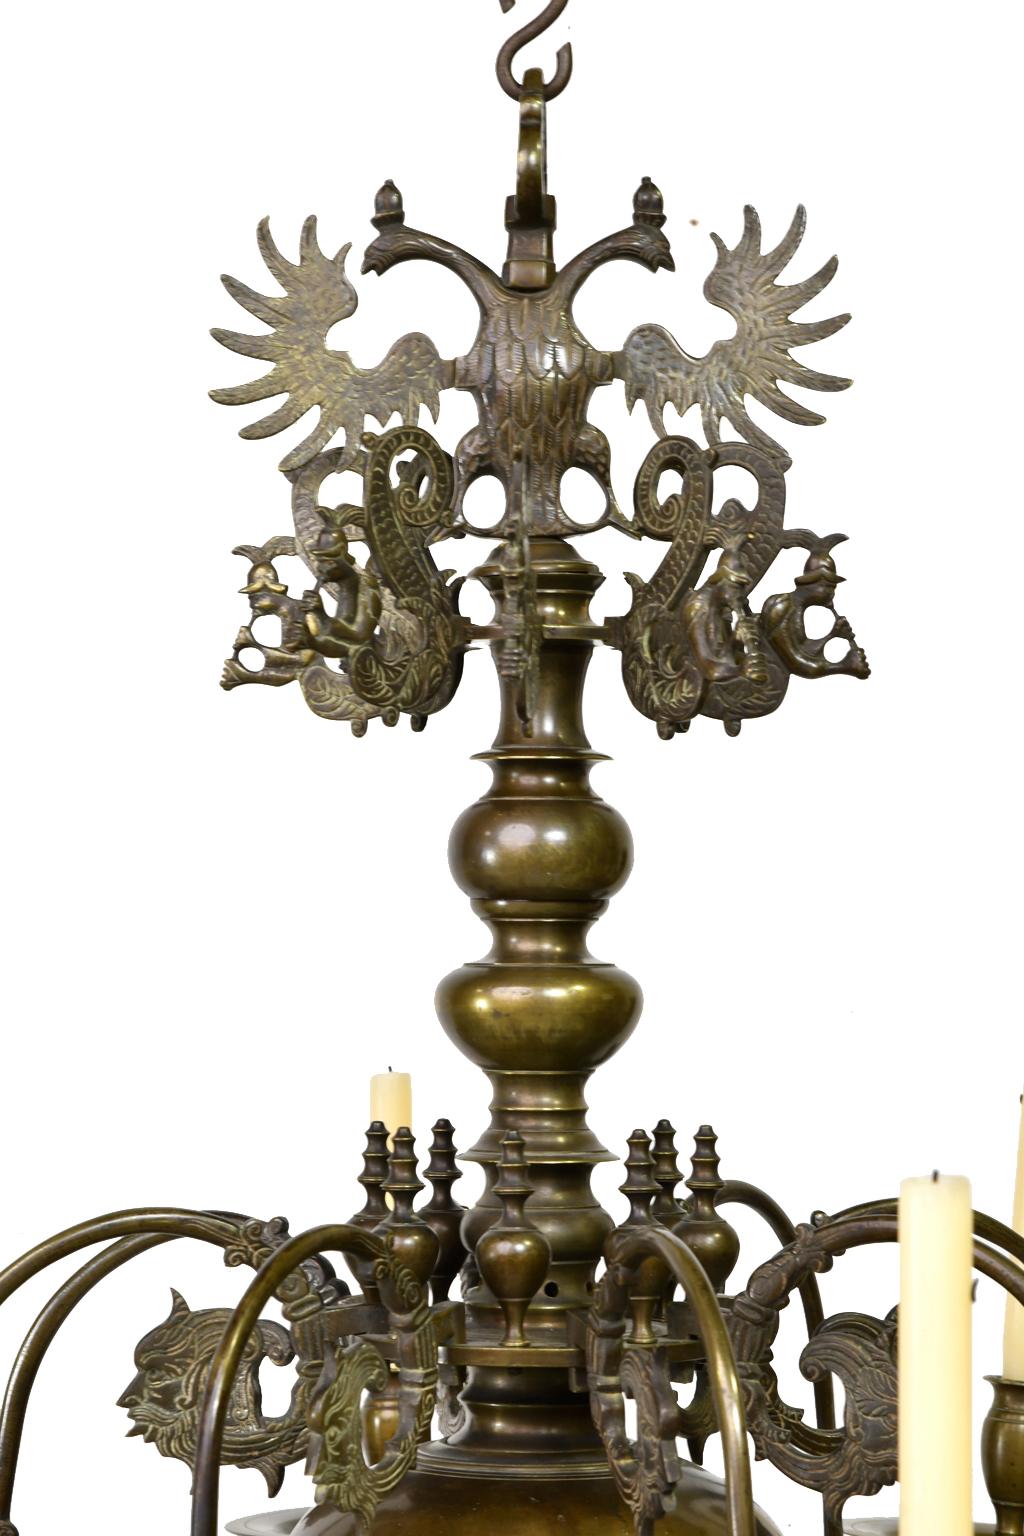 An exceptionally beautiful and large Baroque chandelier with candelabra from the low countries in Europe in cast bronze with eight removable arms and decorative, mythological motifs that include a double-headed eagle, dolphin-headed serpents and